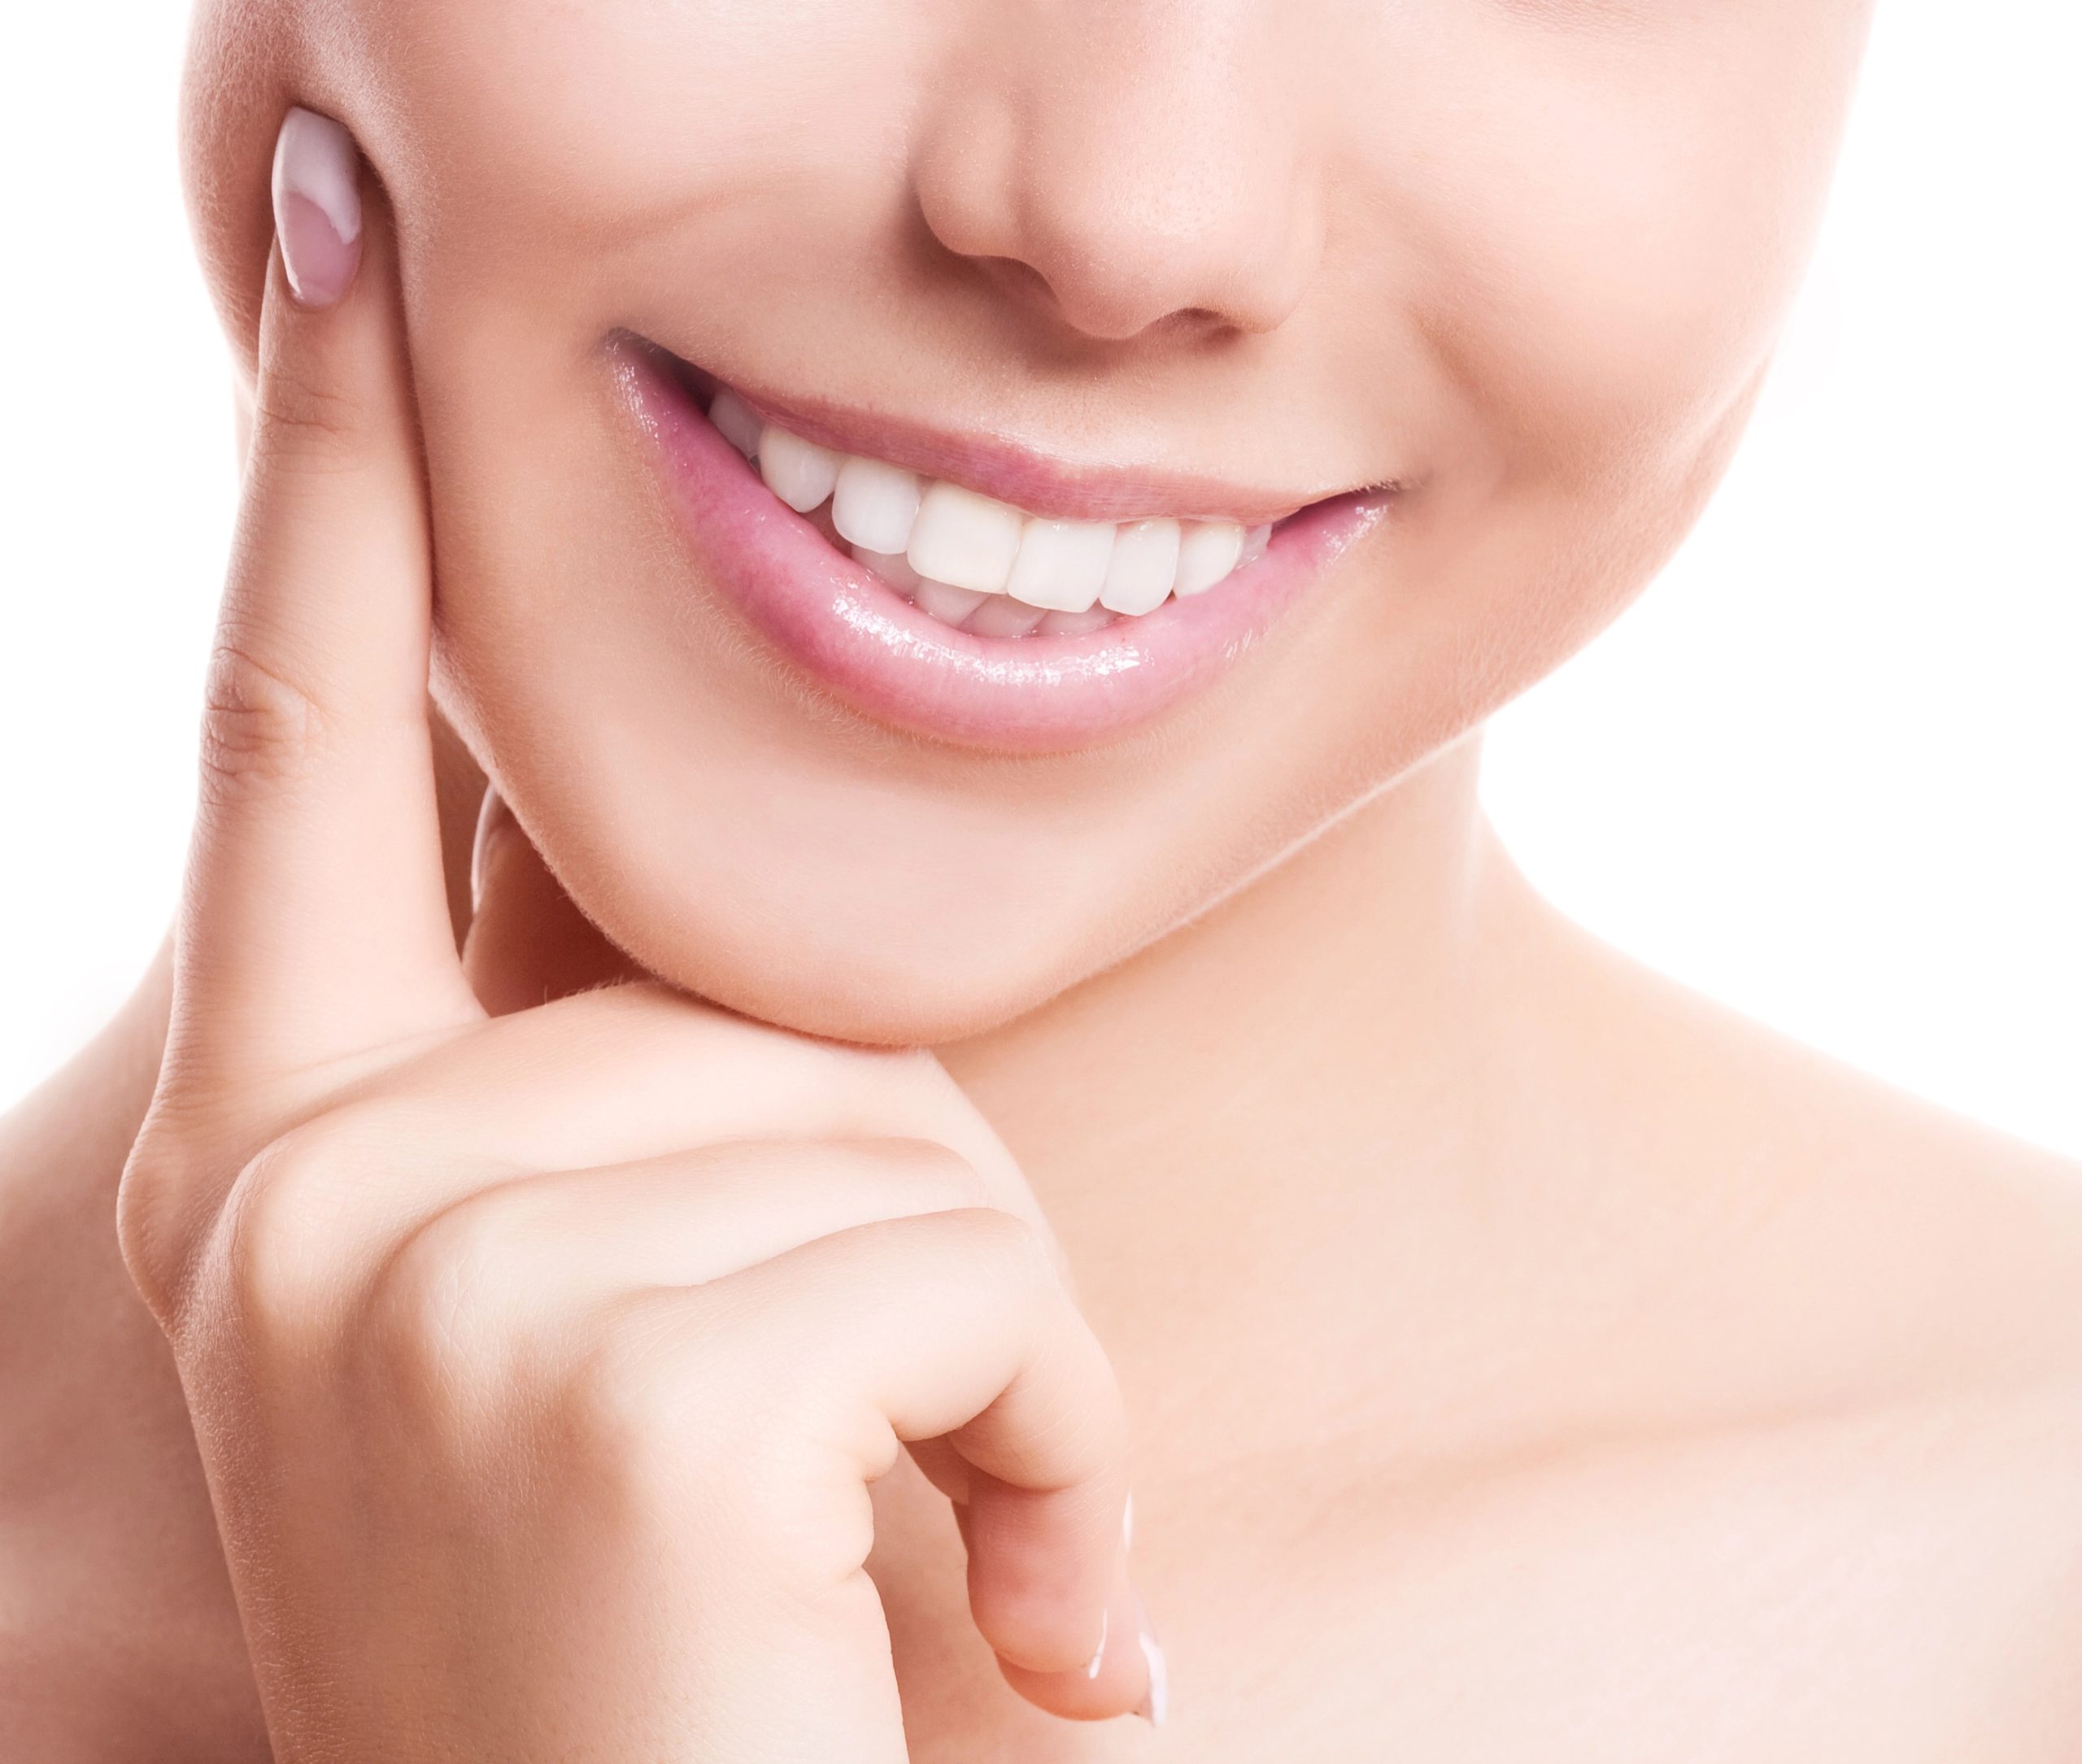 Teeth Whitening Services in Snohomish Guide